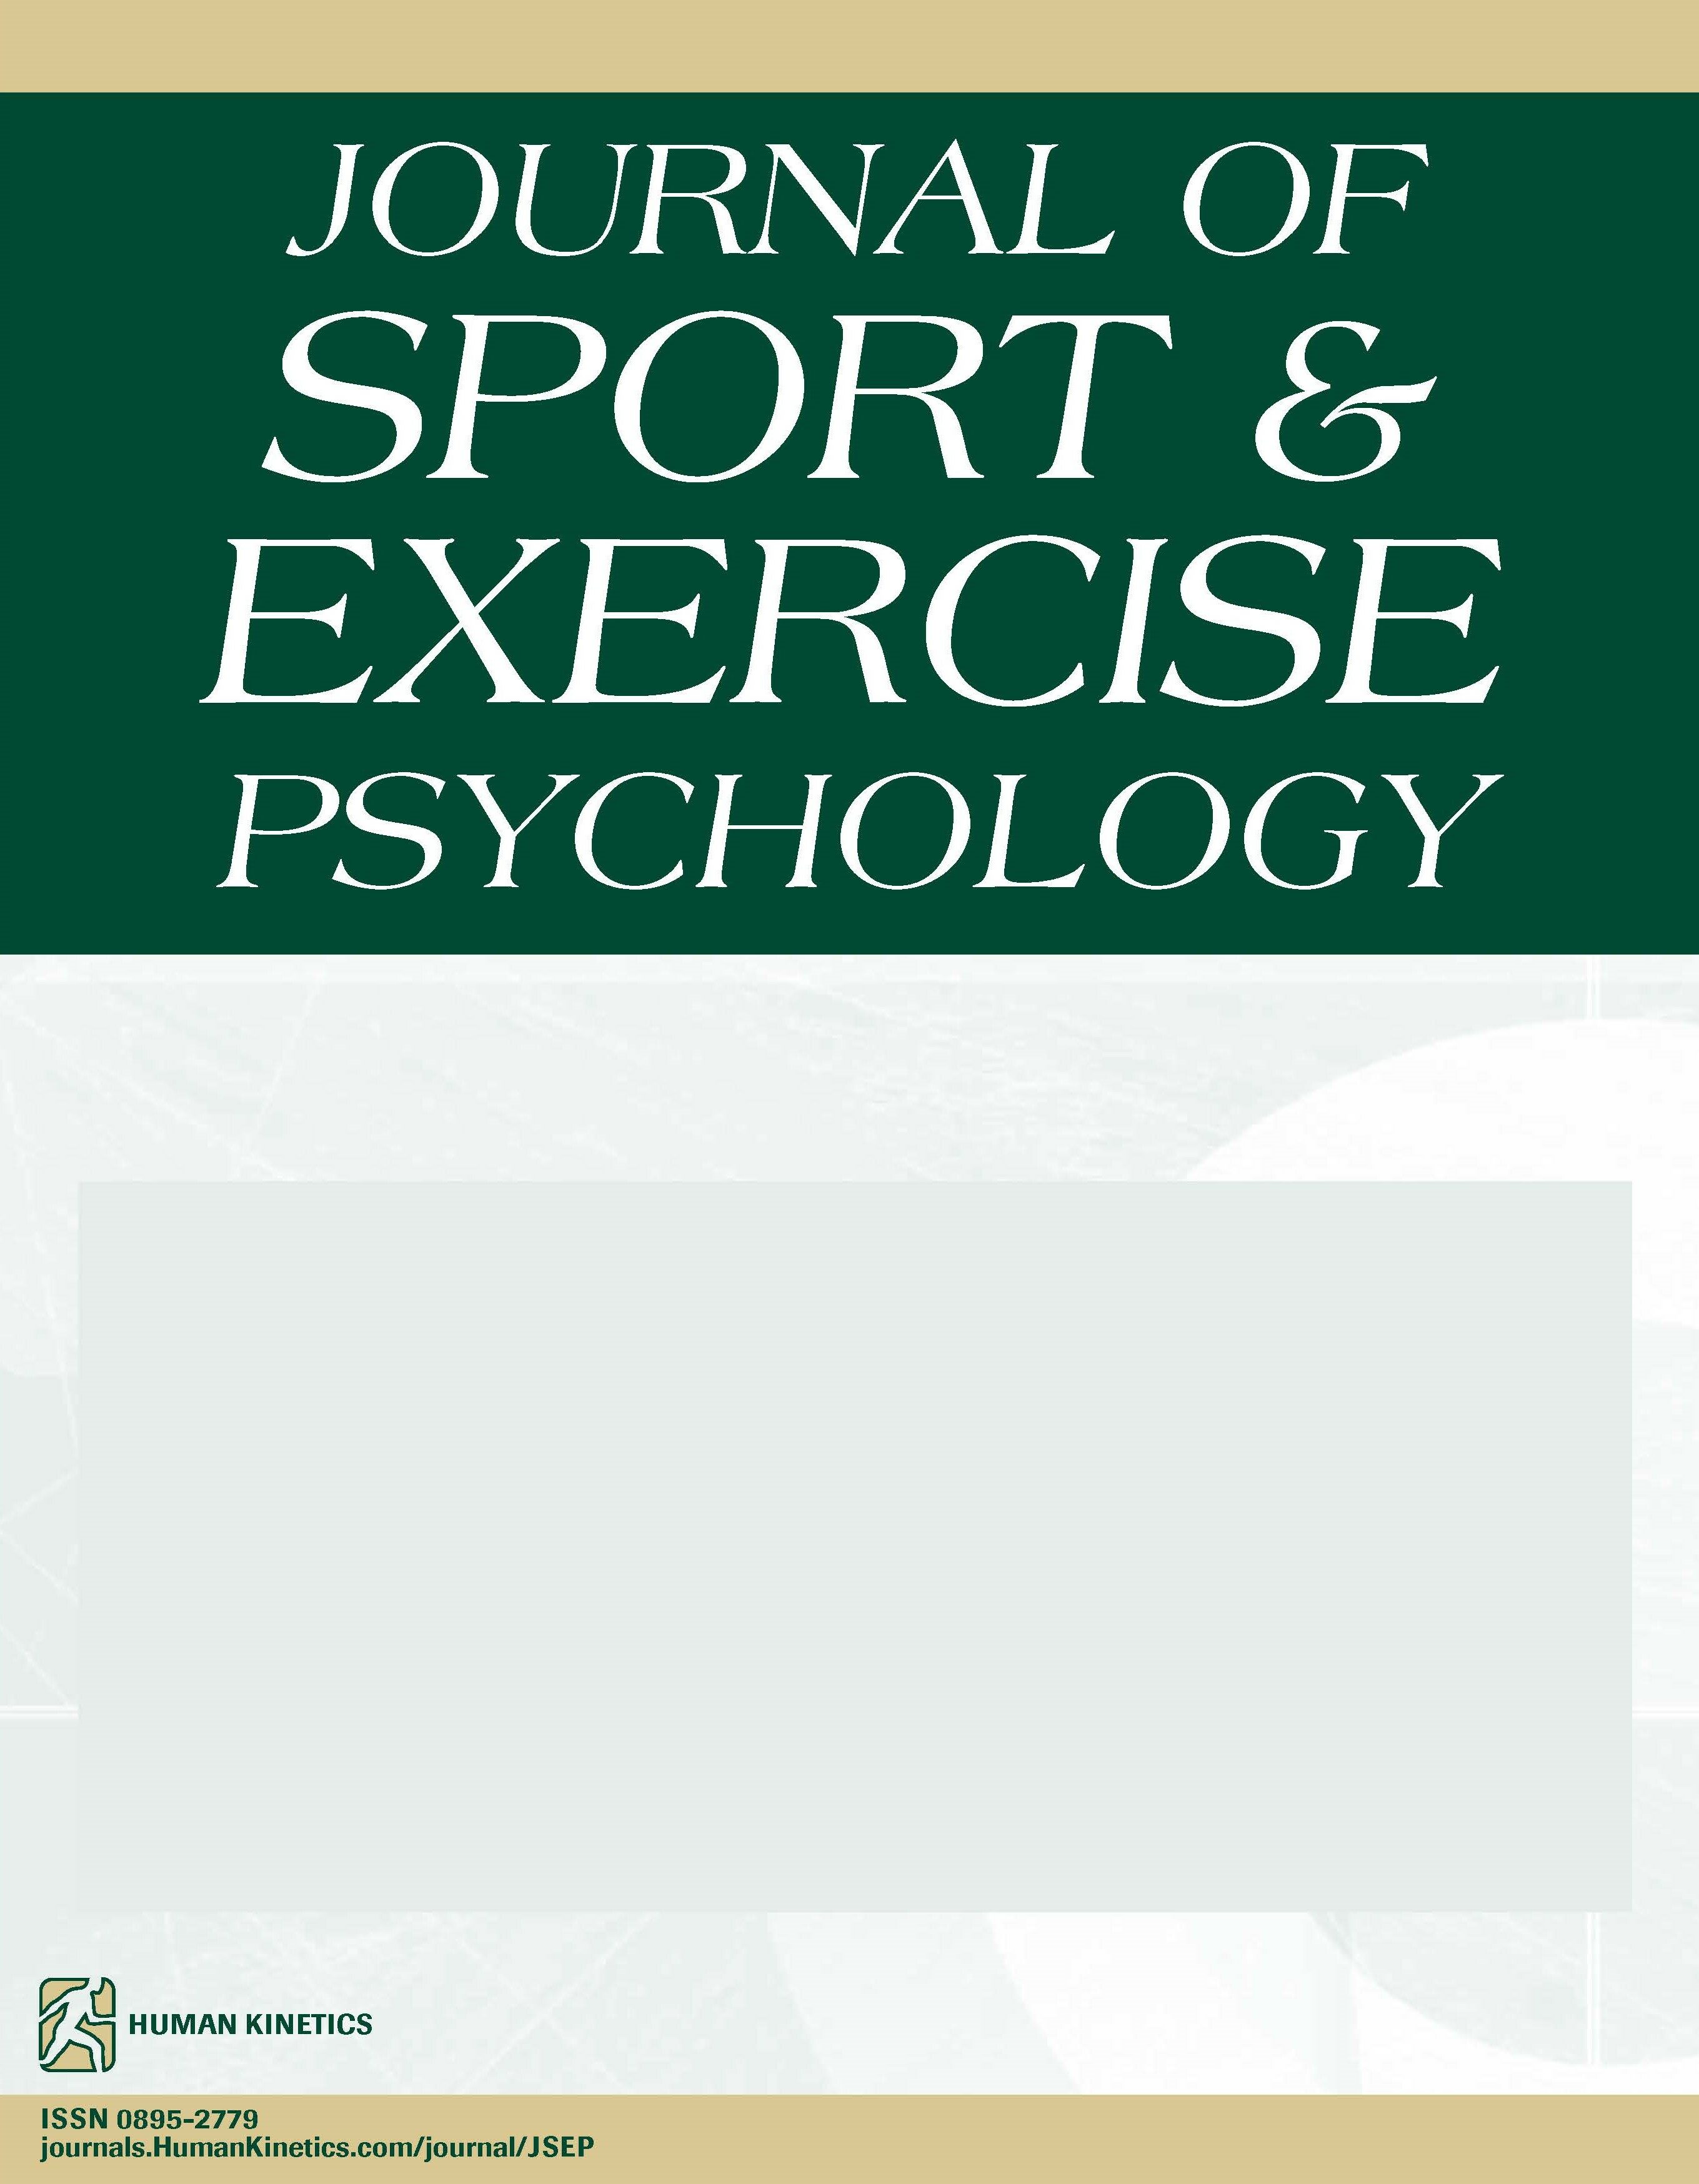 Athletes’ Coping With the COVID-19 Pandemic: The Role of Self-Compassion and Cognitive Appraisal